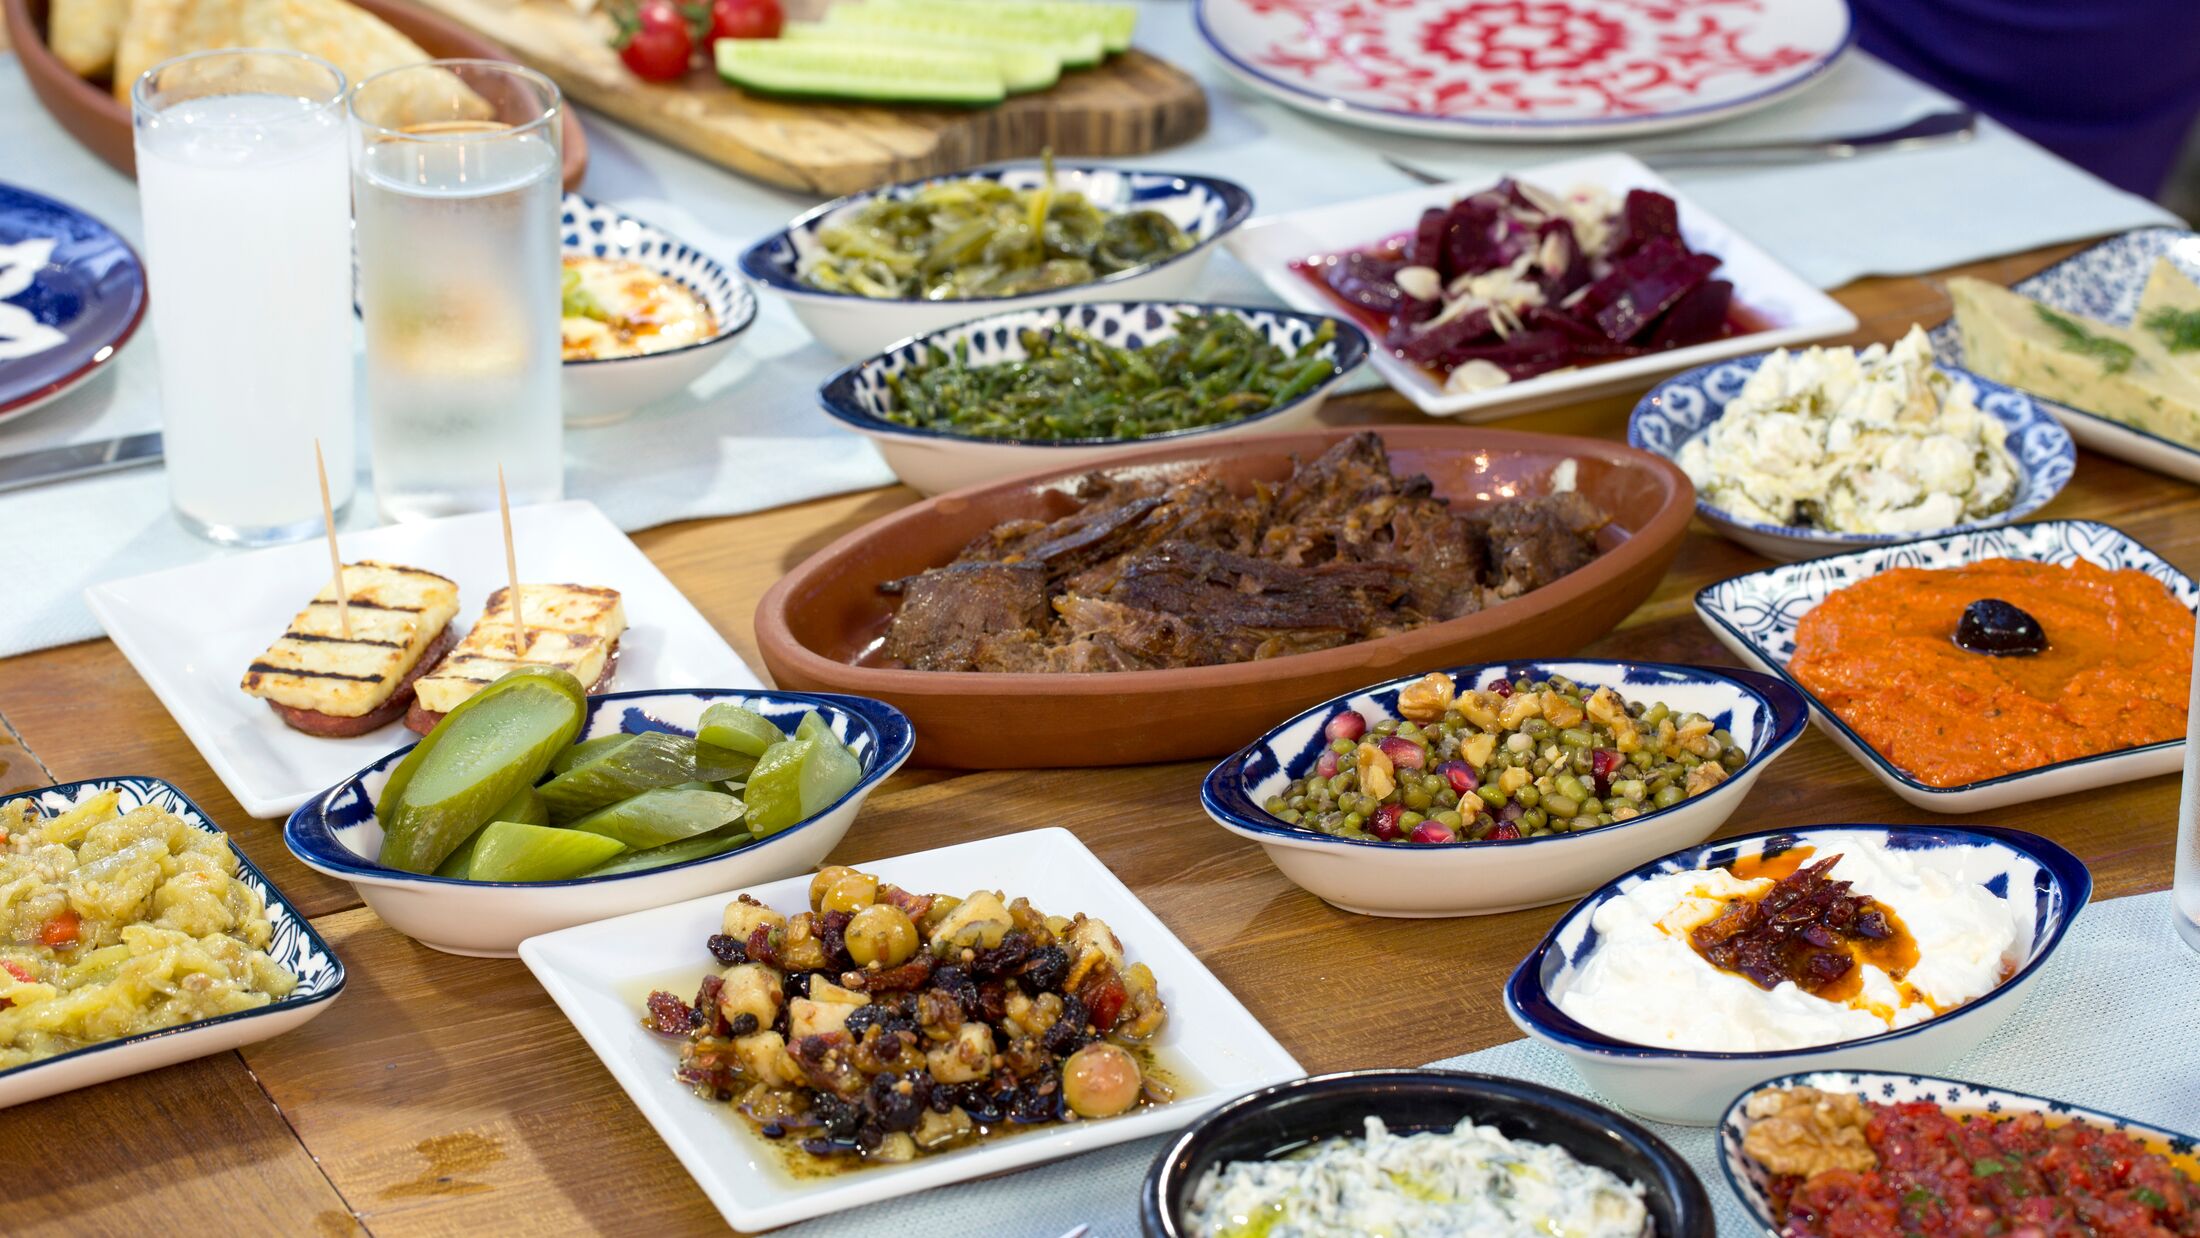 Luxury table with plate of fish, meat, pickles, antipasto, aubergine, appetizers, cheese, mezze, salad, octopus, raki and ouzo. Copy space for text area.